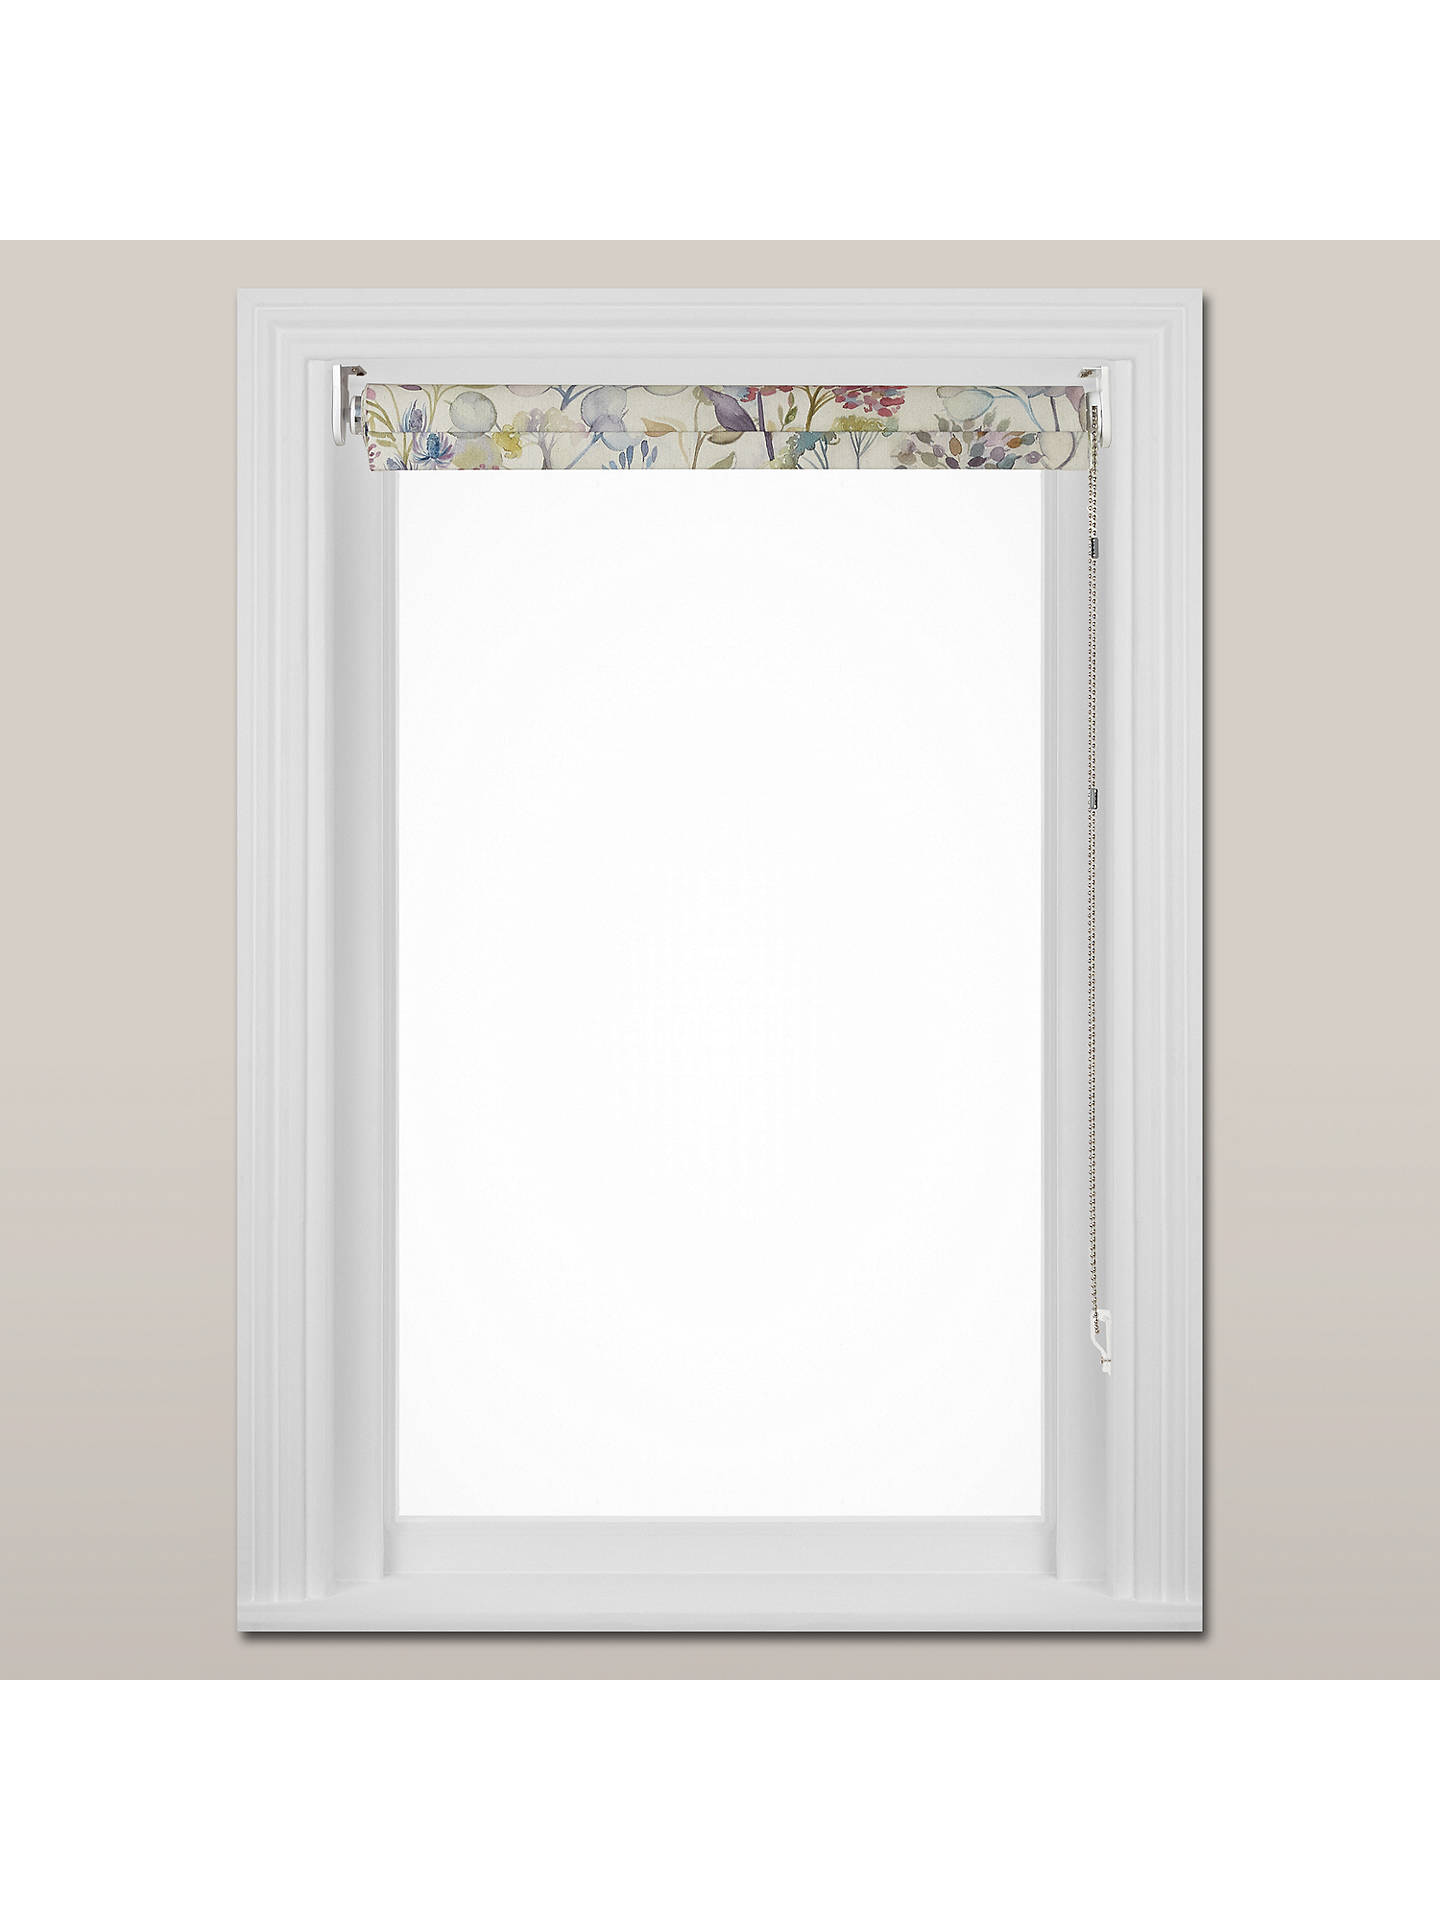 Voyage Hedgerow Made to Measure Blackout Roller Blind, Multi